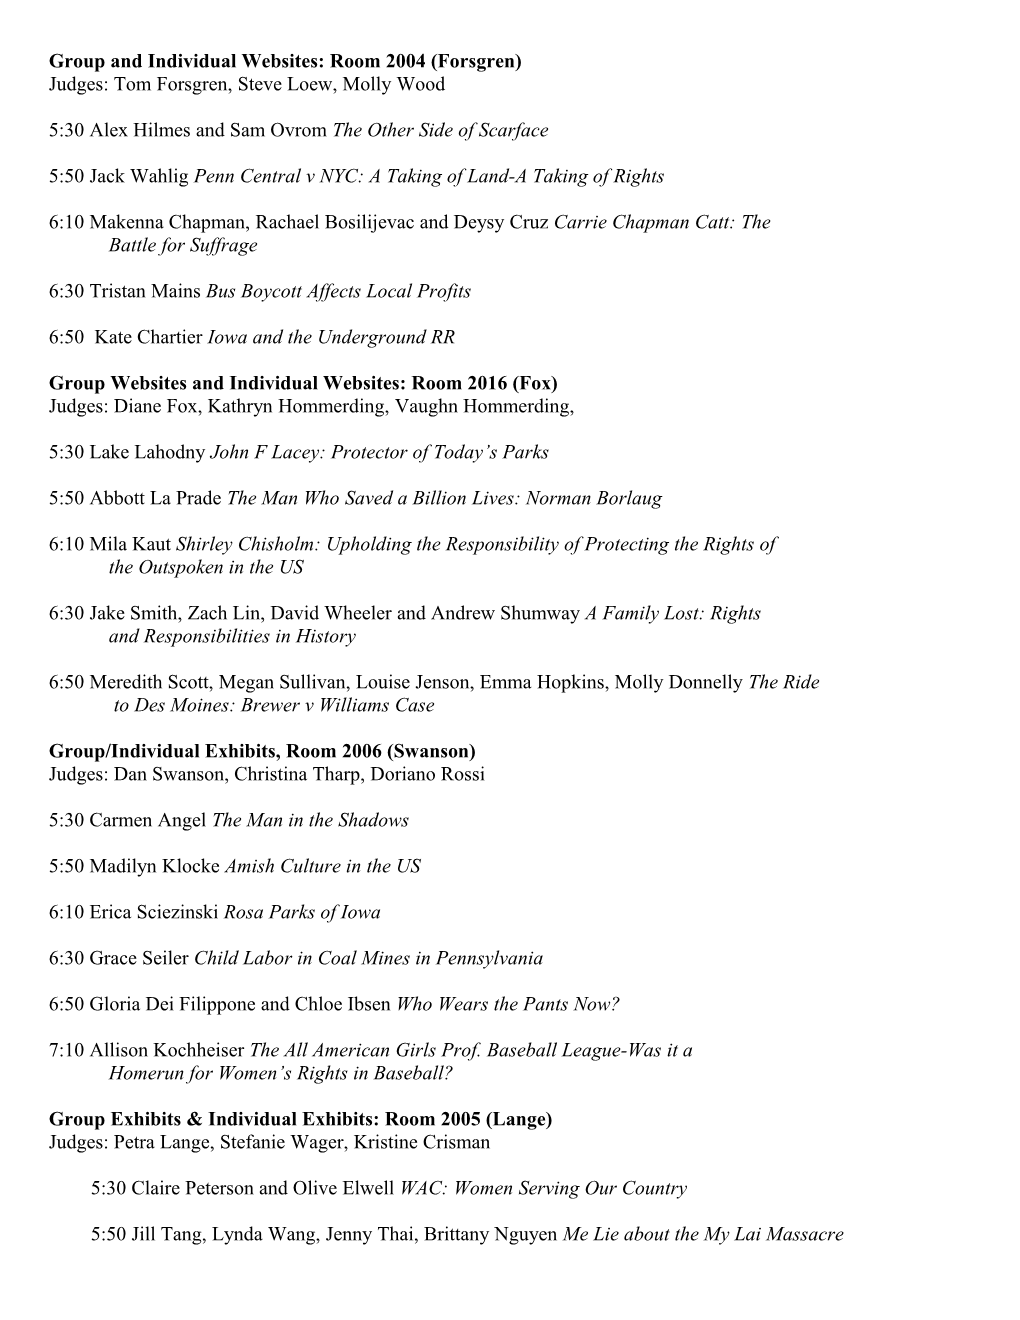 History Night-Thursday, March 8, 2012 Schedule and Locations